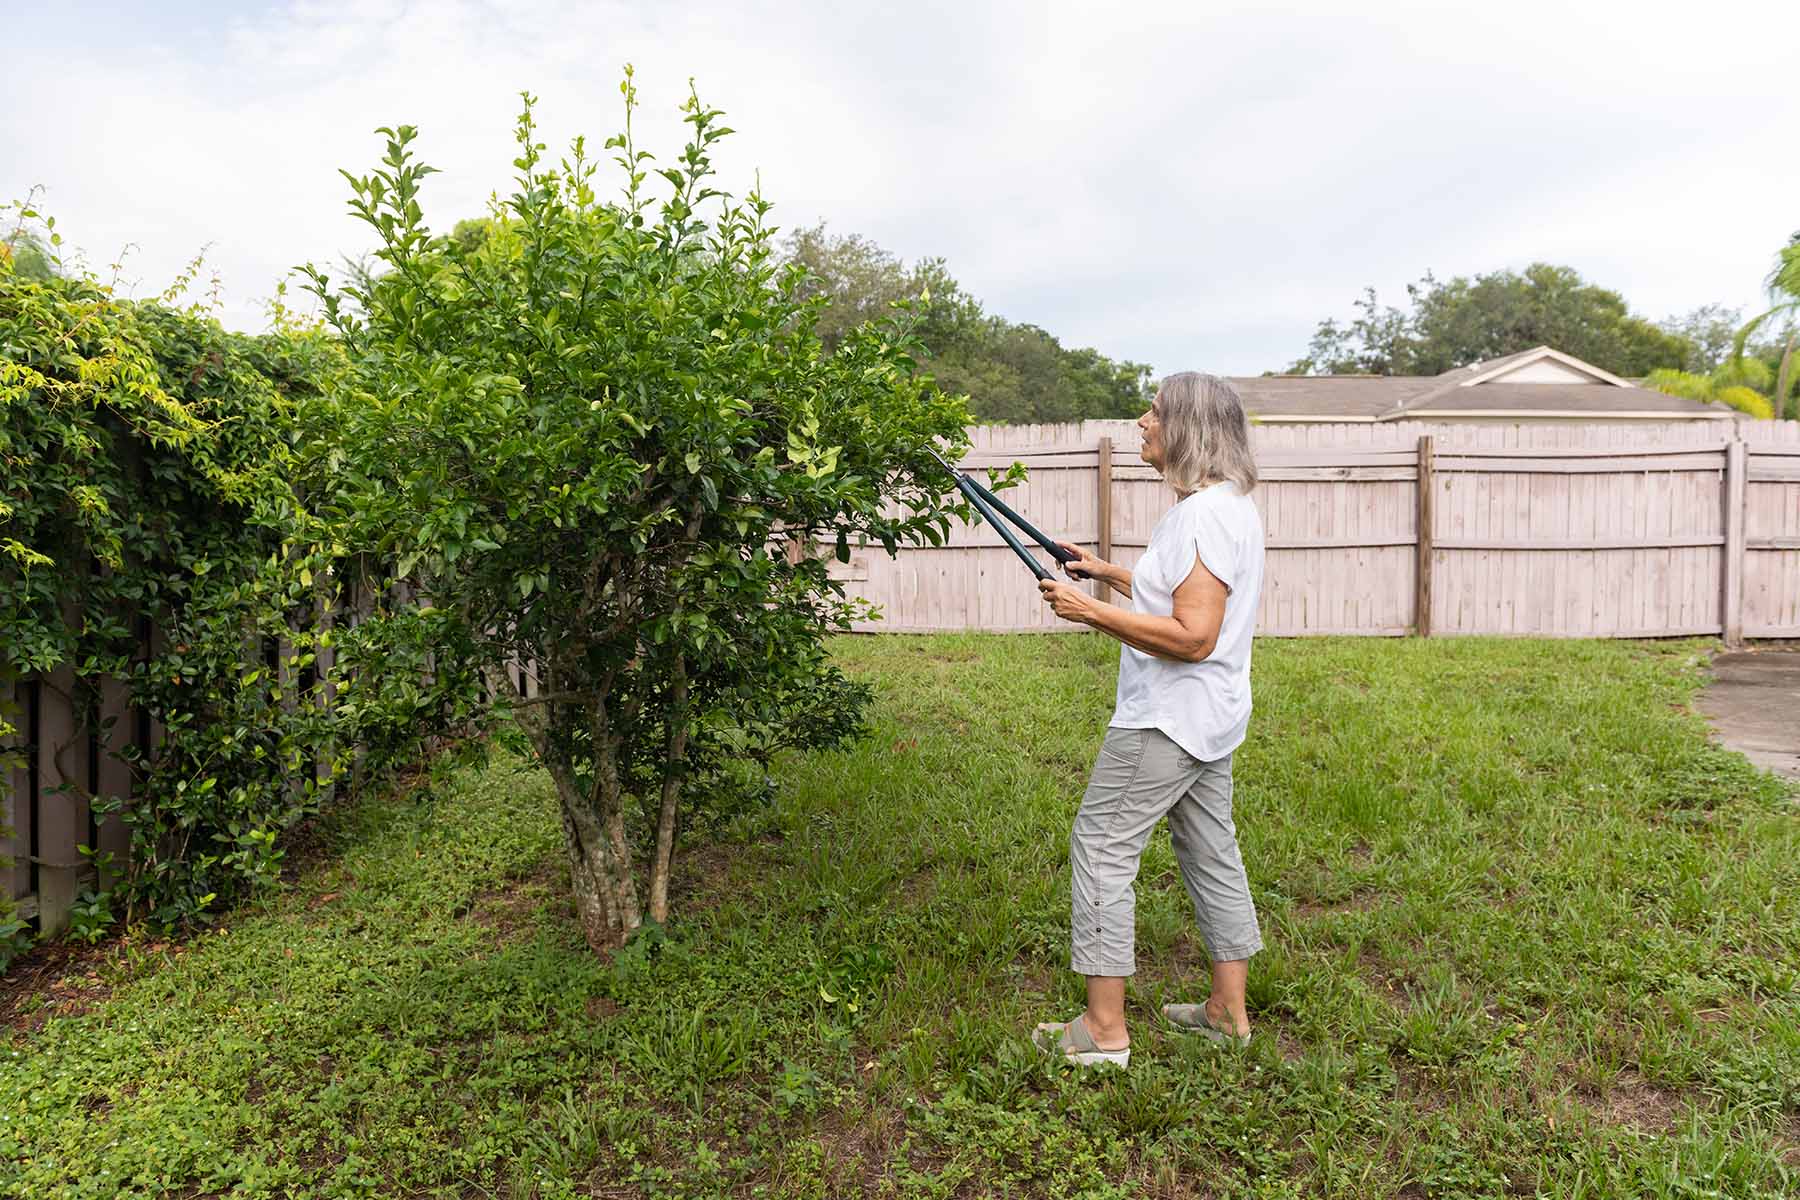 Hispanic woman trims the shrub in her backyard in Florida while not wearing any protective gear.